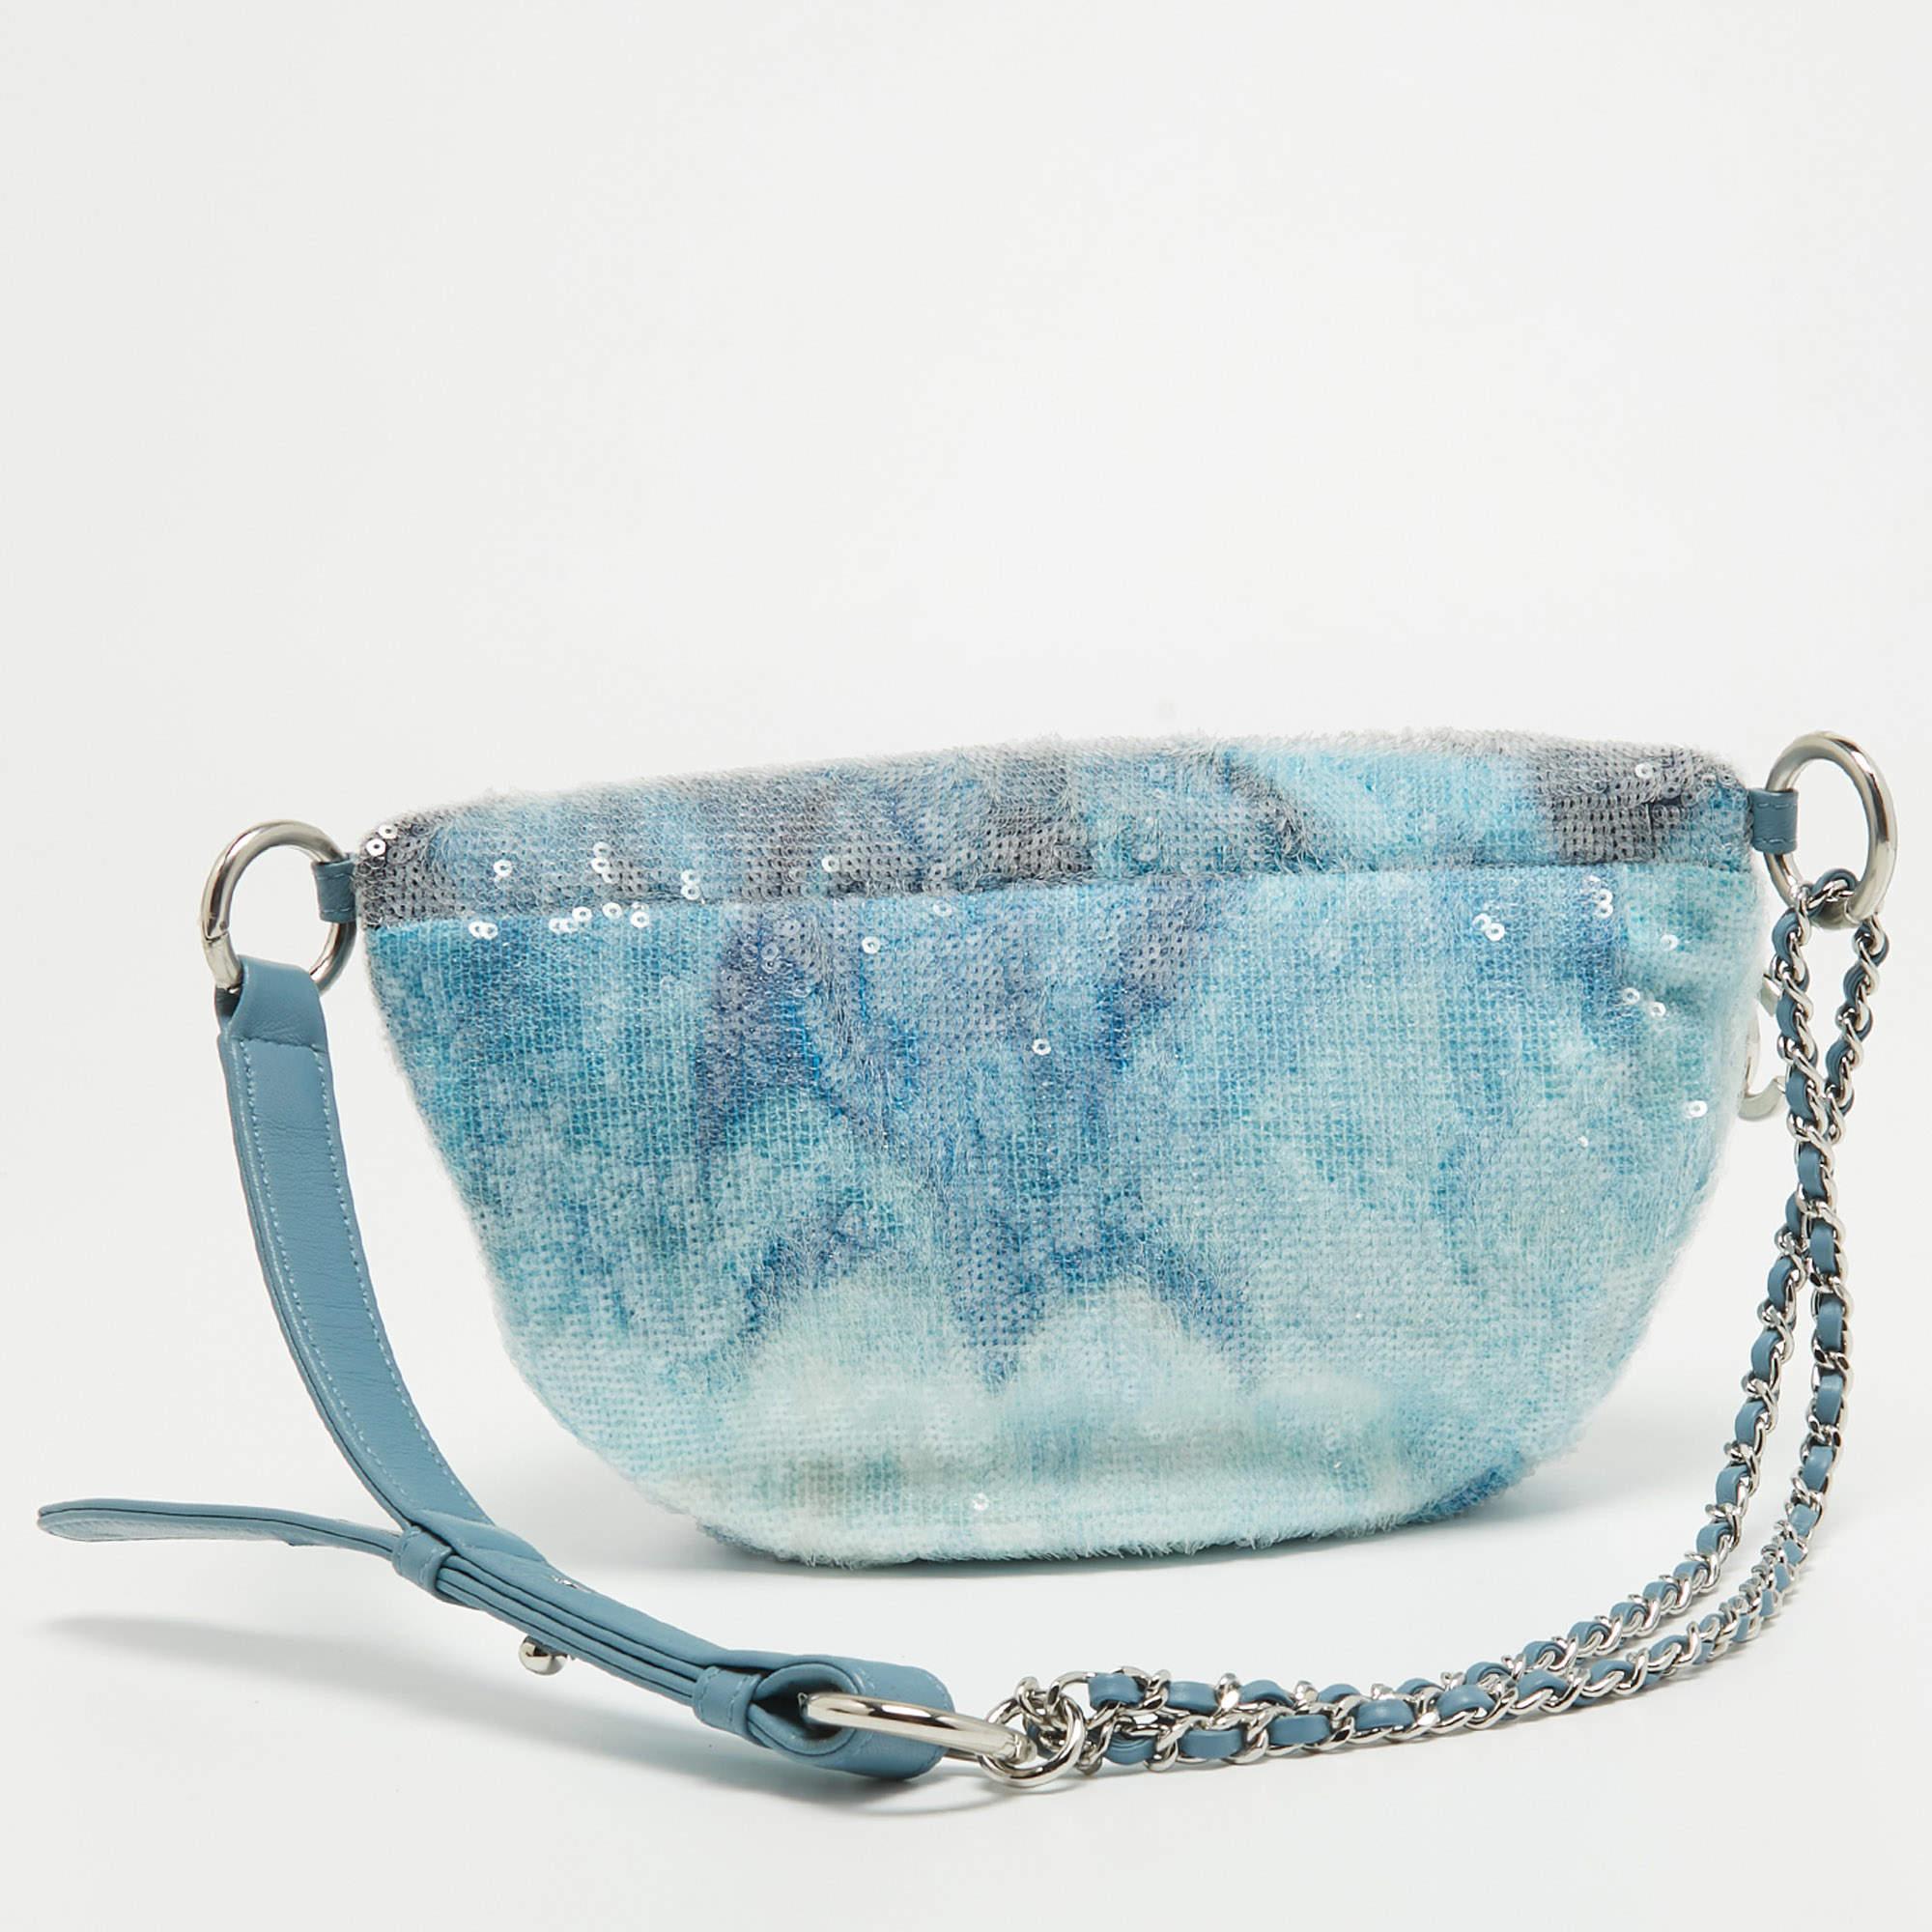 This uber-stylish Chanel Waterfall belt bag aims to be an elevating piece. It is carefully covered in sequins and its light blue hue evokes timeless beauty. See how it transforms a T-shirt dress or a solid jumpsuit!

Includes: Authenticity Card
